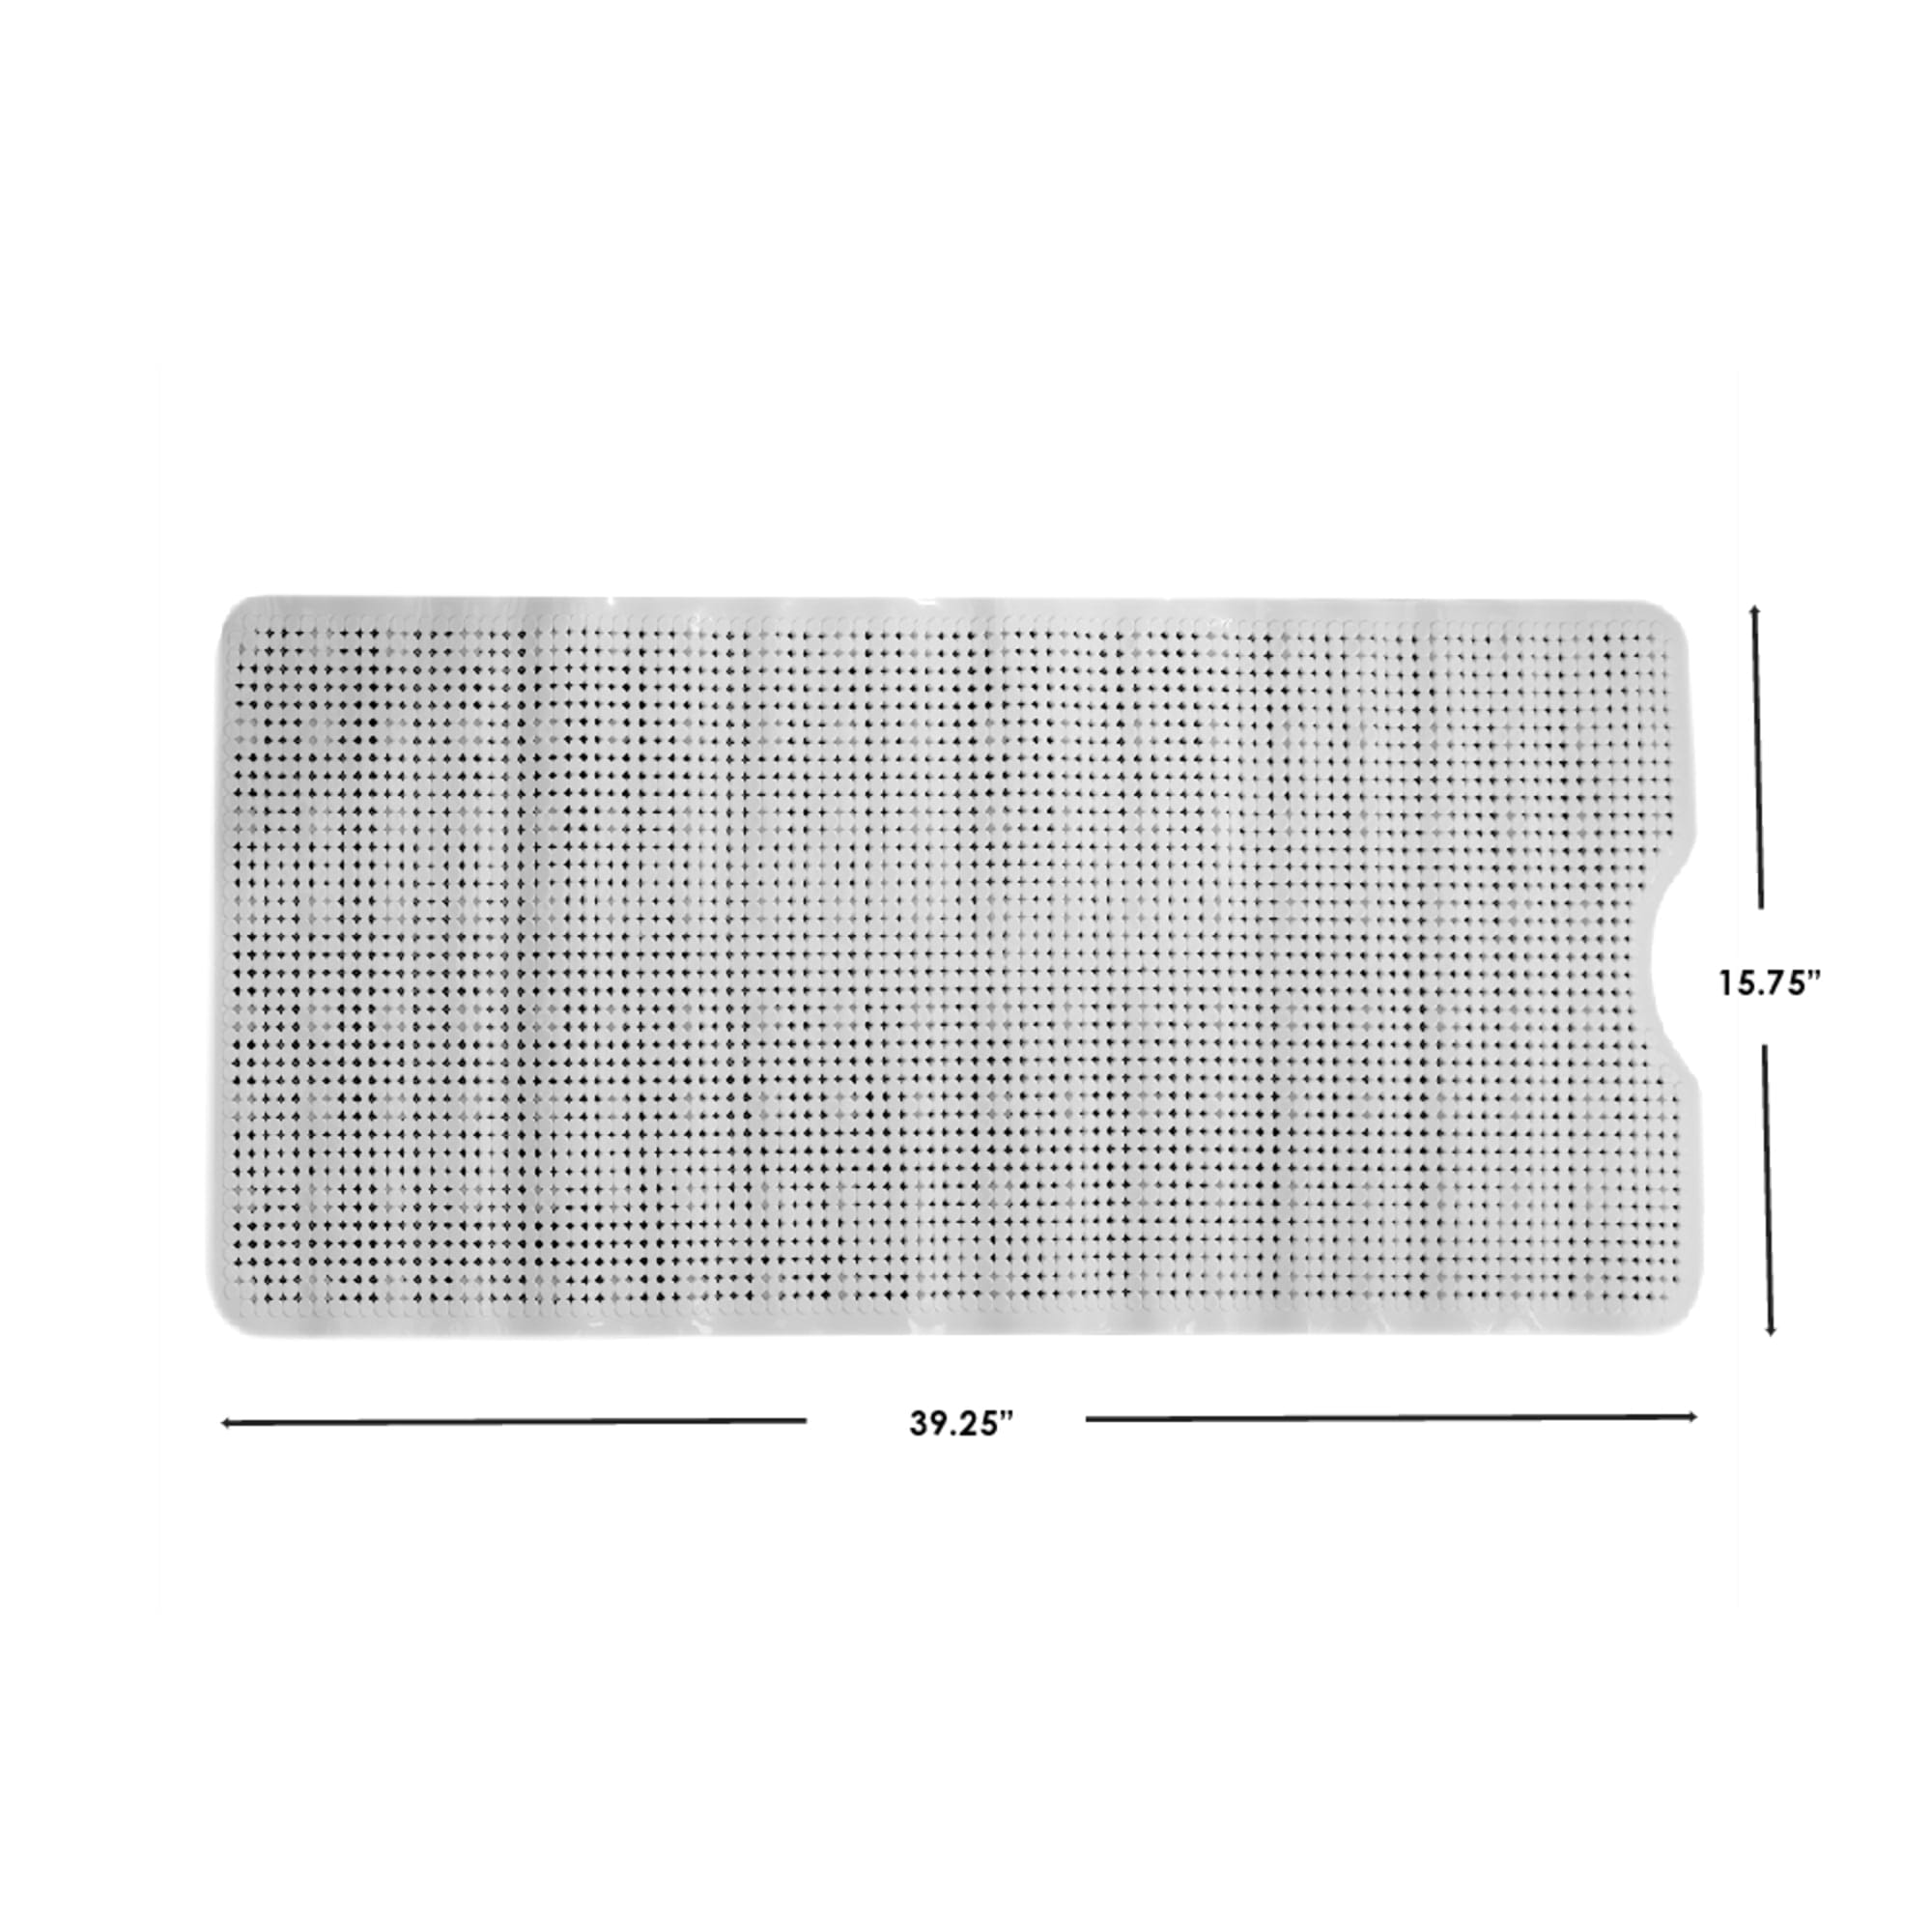 Home Basics Dot U Shape Front Plastic Bath Mat with Suction Cup Backing, White $5.00 EACH, CASE PACK OF 12